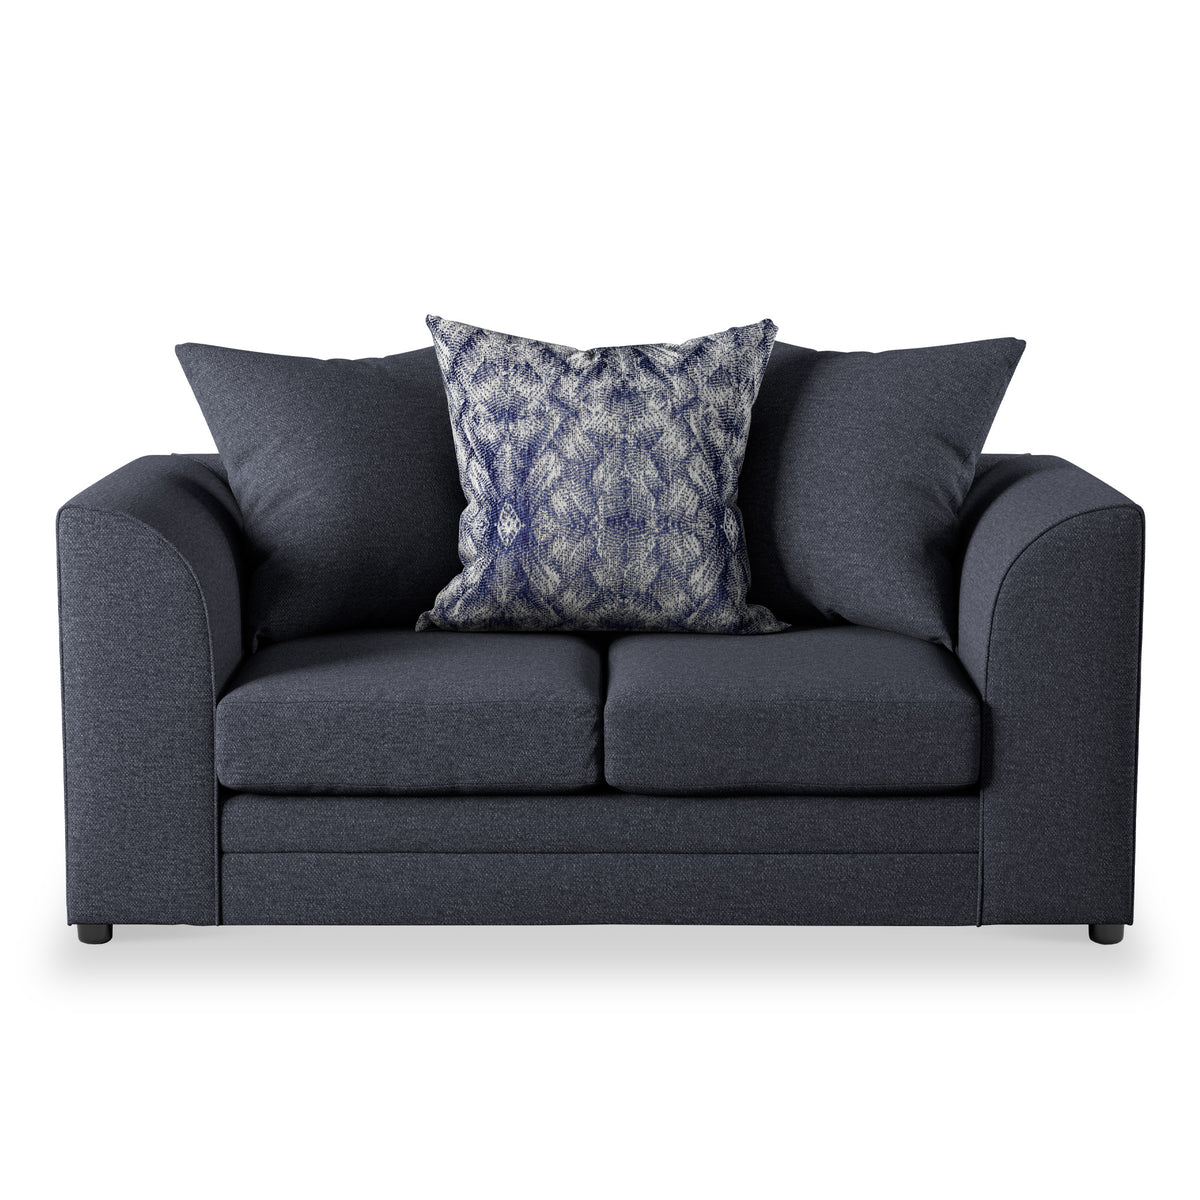 Tisha Navy 2 Seater couch